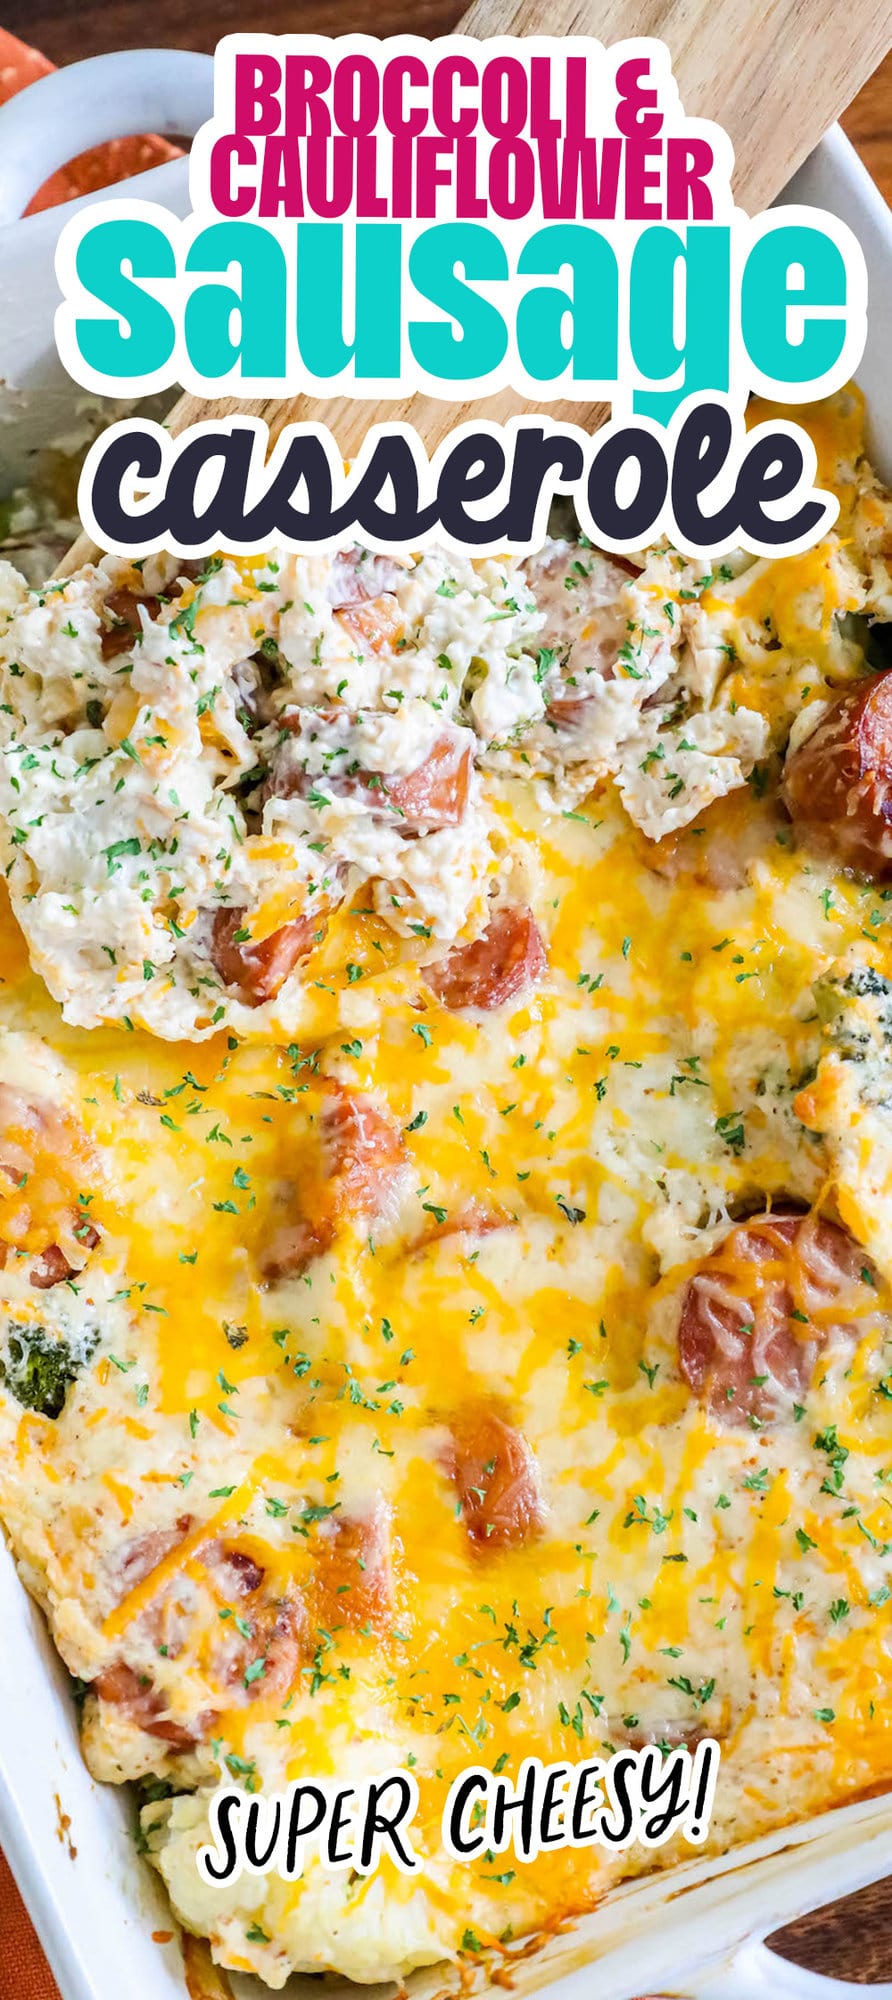 wooden spoon scooping baked cheesy casserole with sliced sausage, broccoli, cauliflower, and herb seasonings in a white casserole dish on a table